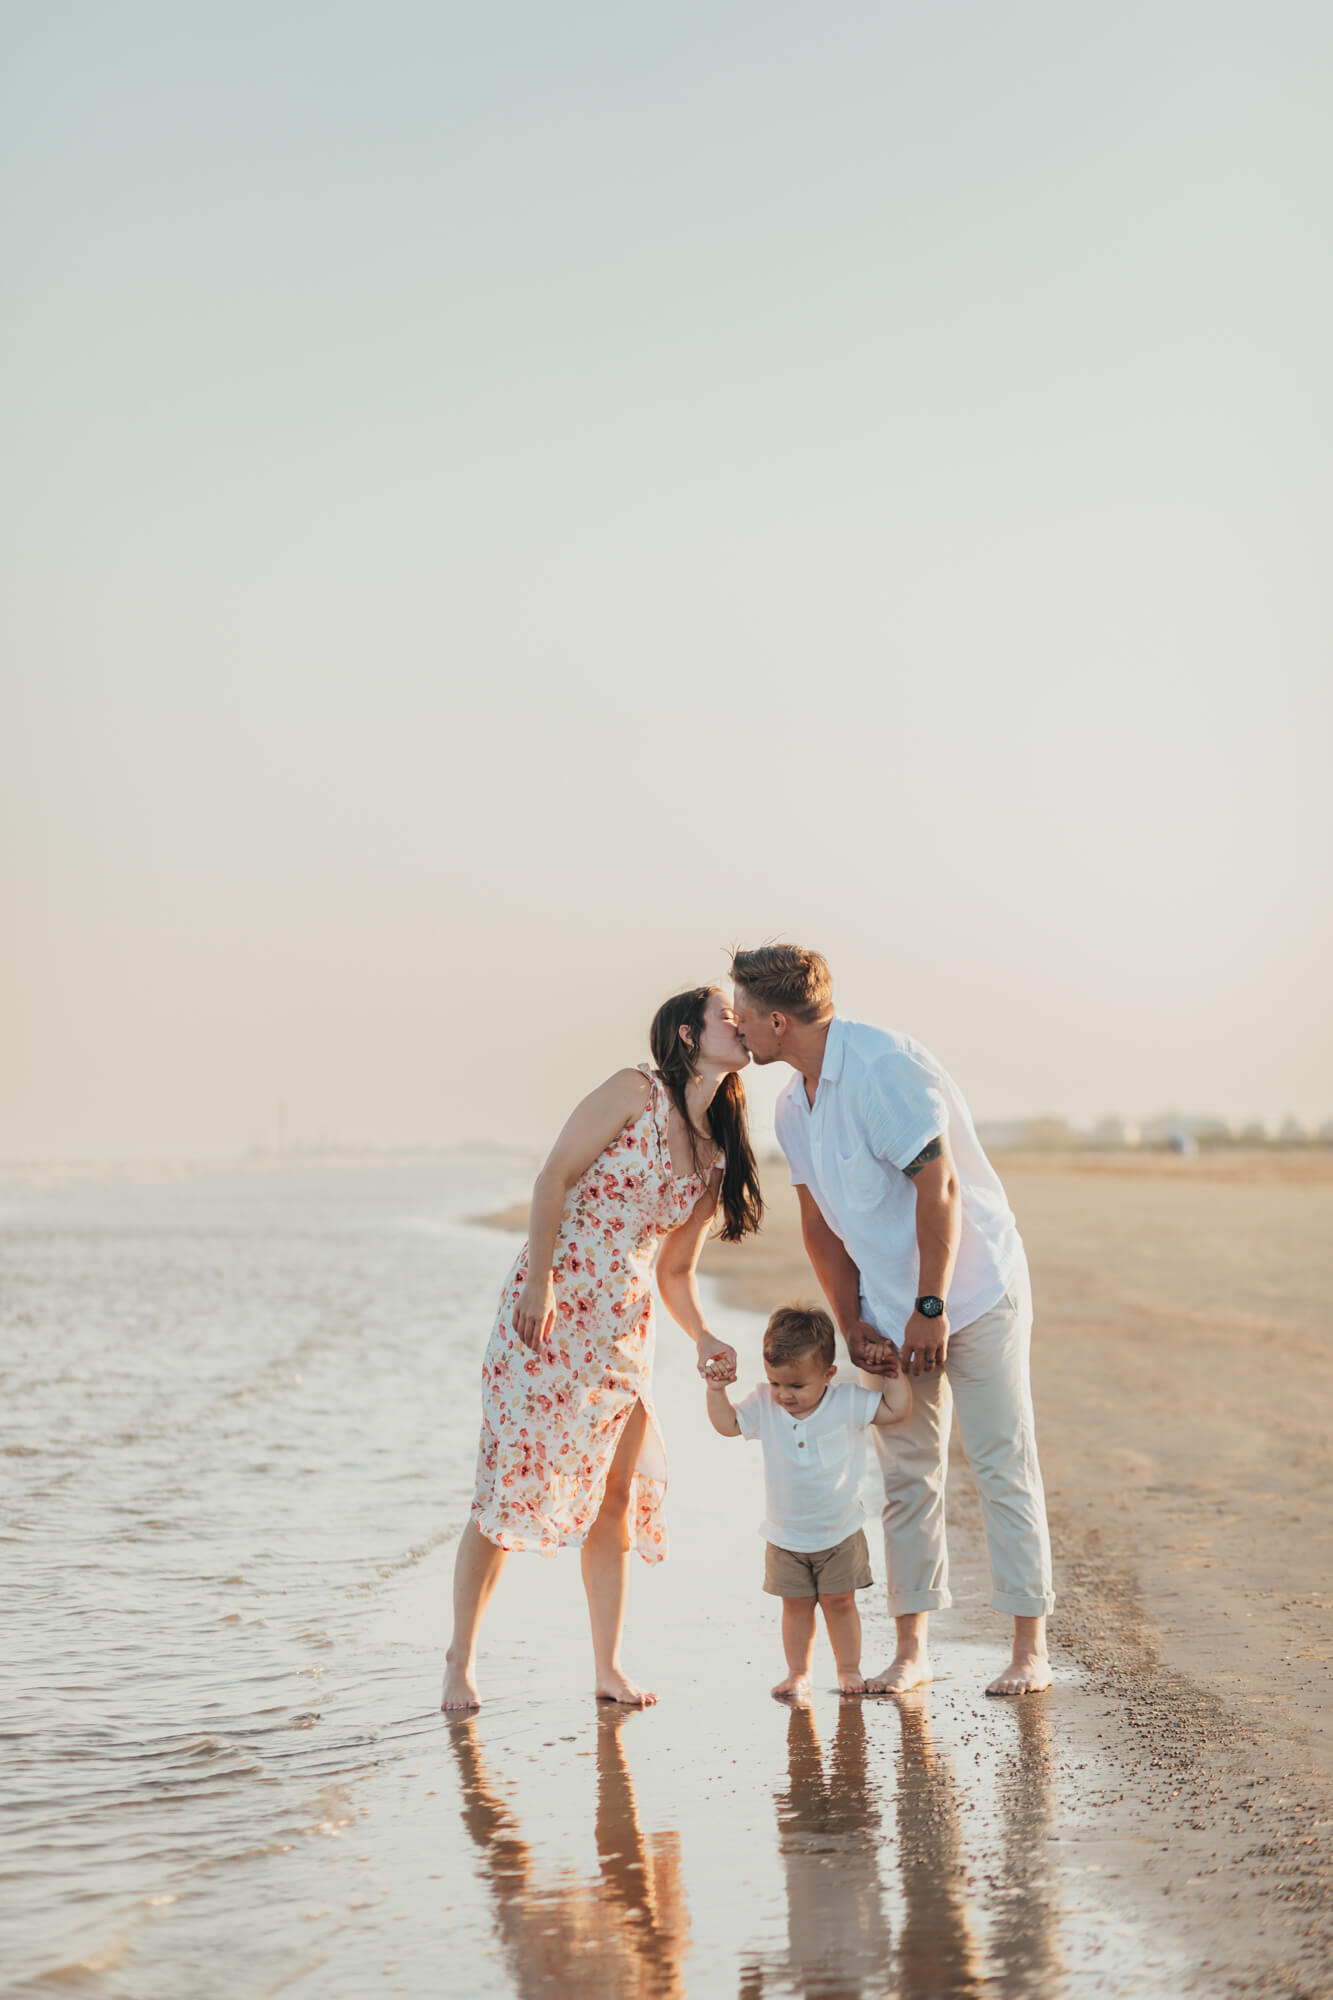 Houston restaurants with playgrounds are a win for this family, walking along the beach with their toddler in tow. Mom and dad kissing over baby boy while on the beach.